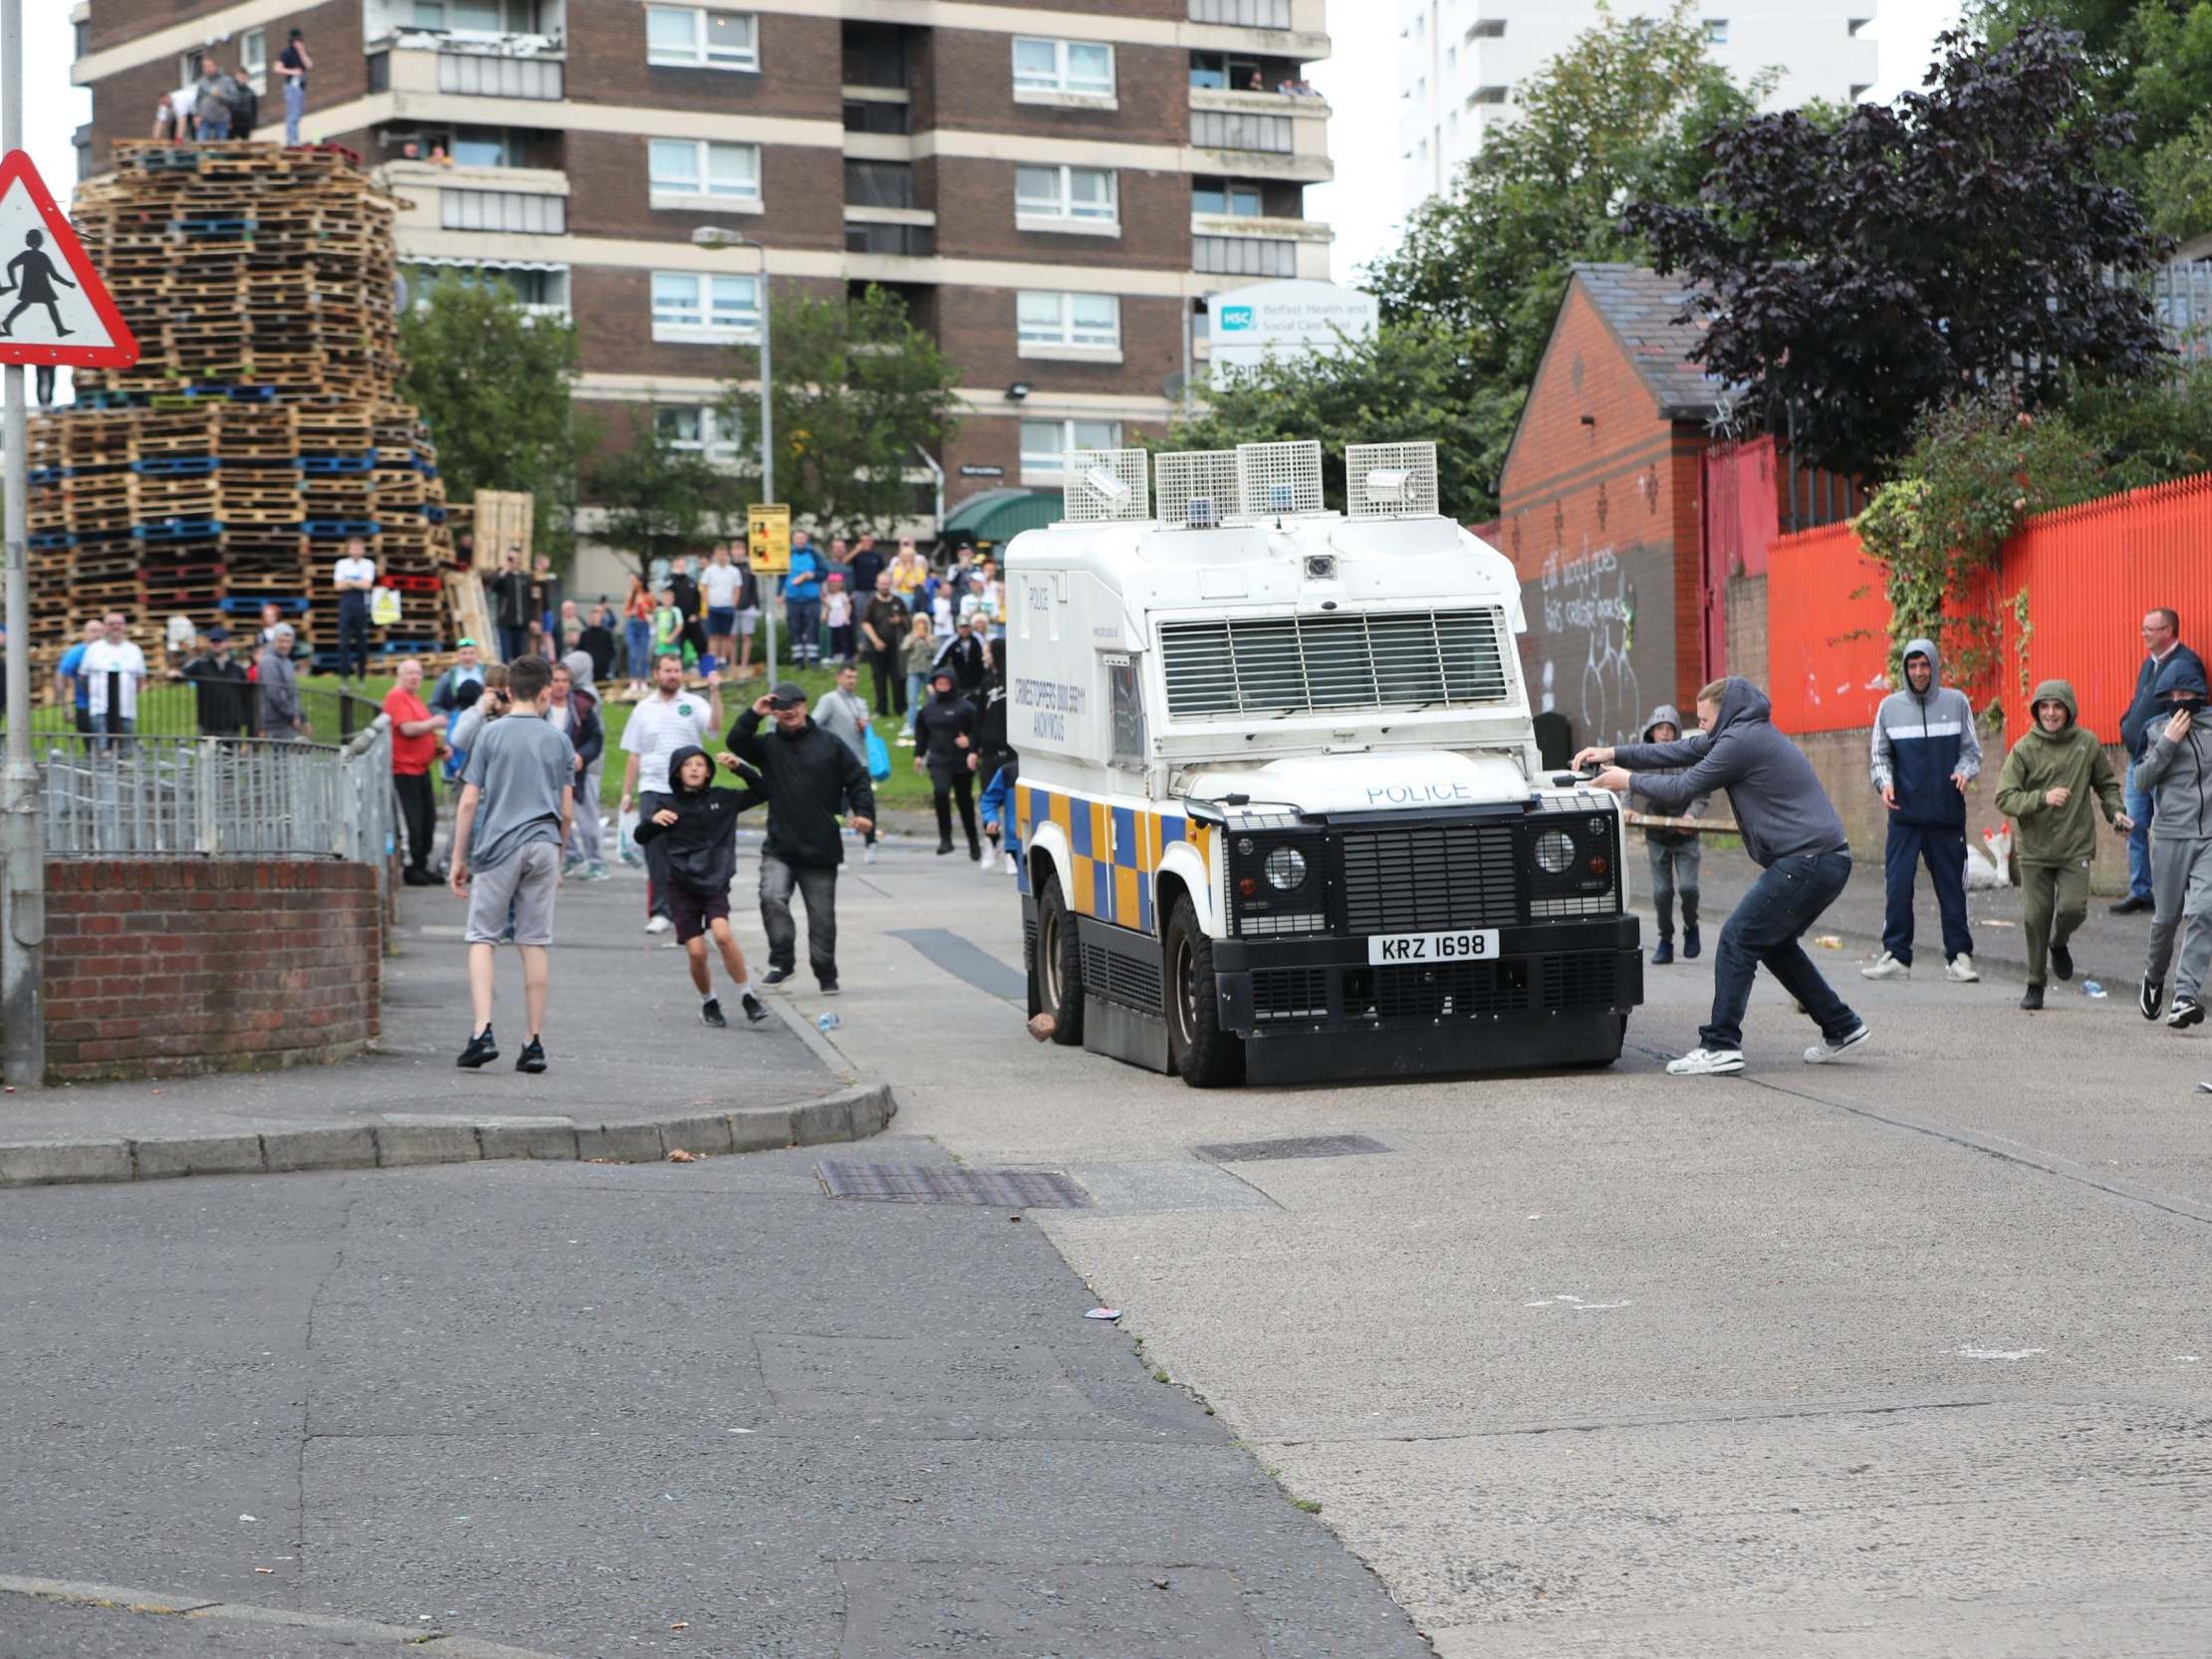 Police are attacked by youths at the site of a proposed bonfire in north Belfast, which contractors have been ordered to remove, 8 August 2019.